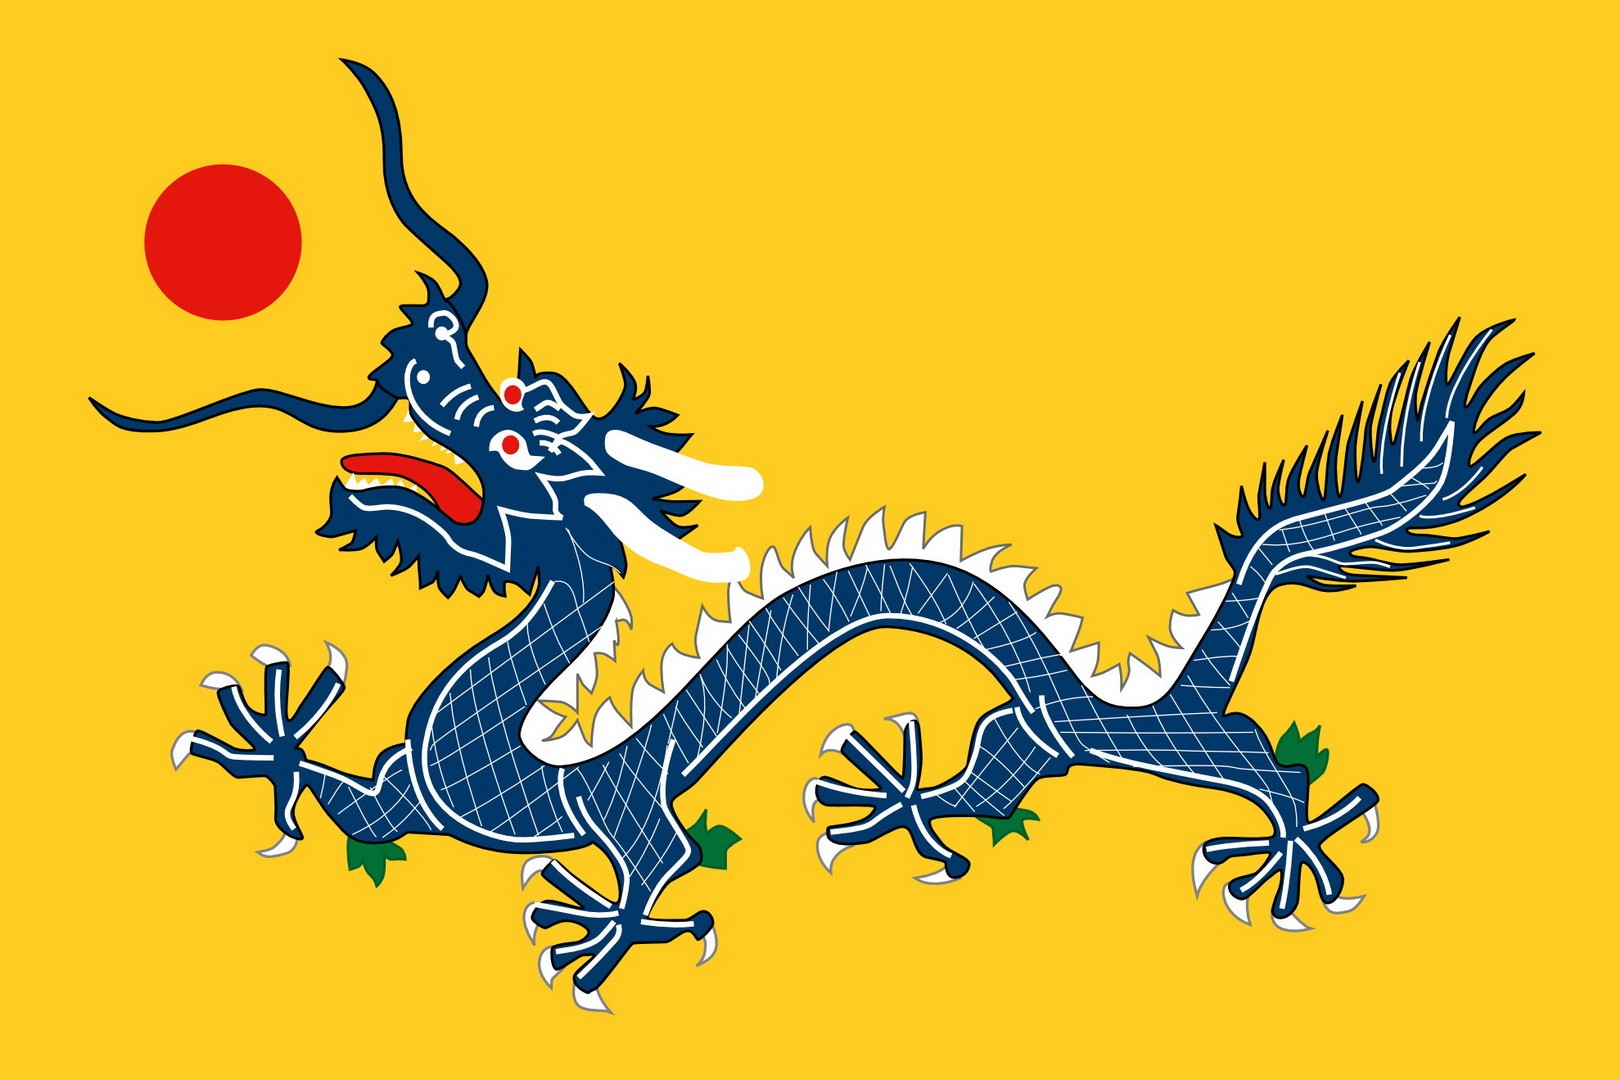 General 1620x1080 Chinese dragon dragon Asia artwork yellow background Chinese simple background